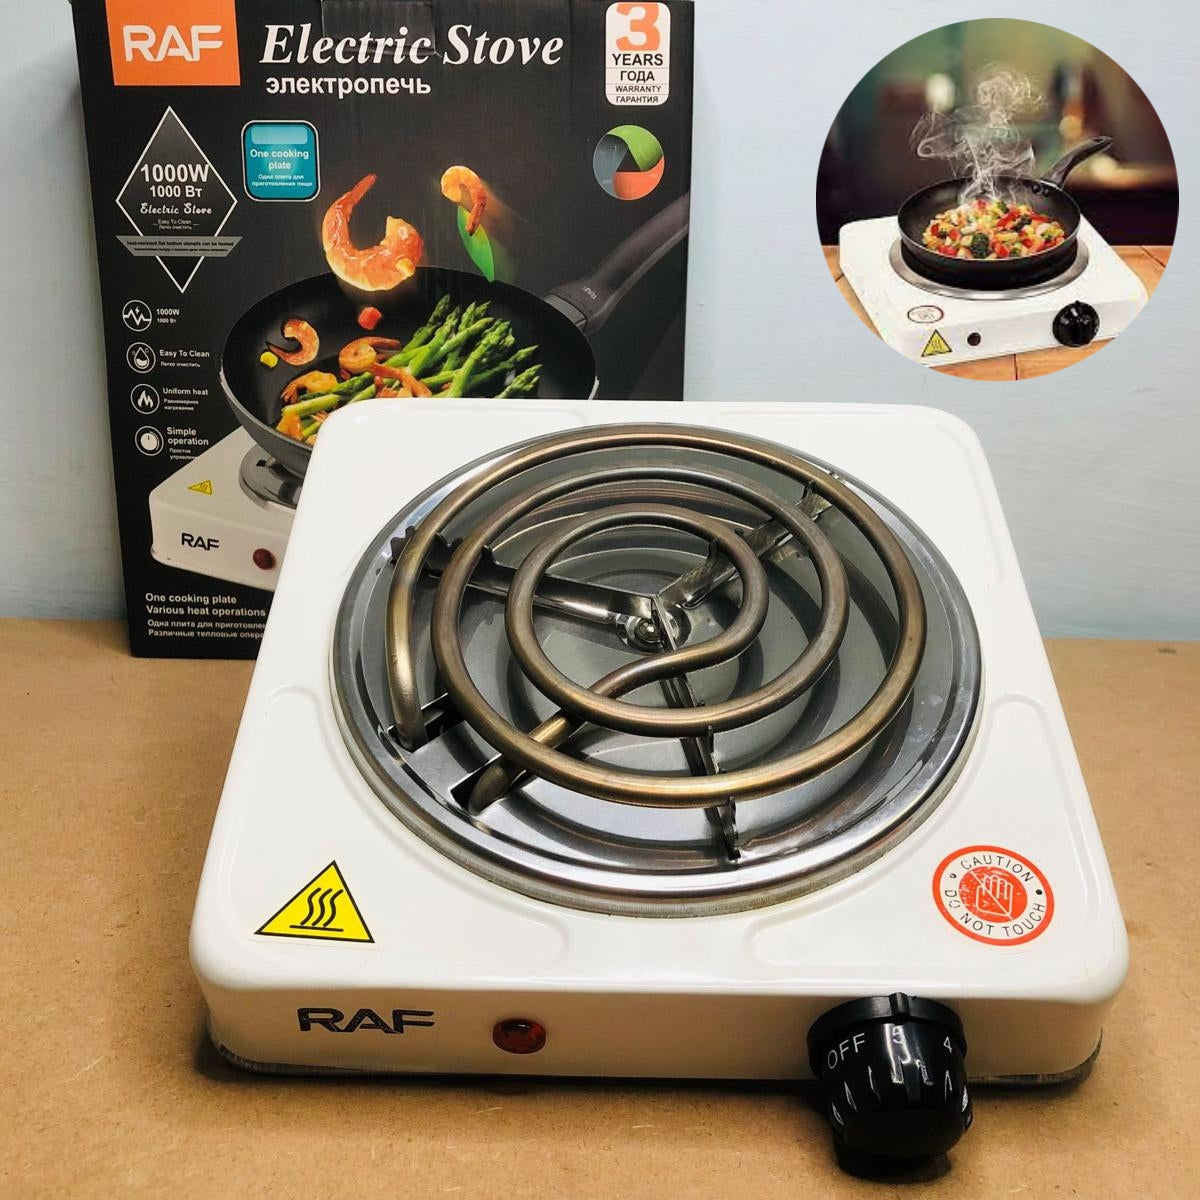 1000W Electric Stove,Single Burner Cooktop,Compact and Portable Electric  Hot Plate,Stainless Steel Hot Plate Cooktop with Temperature Control